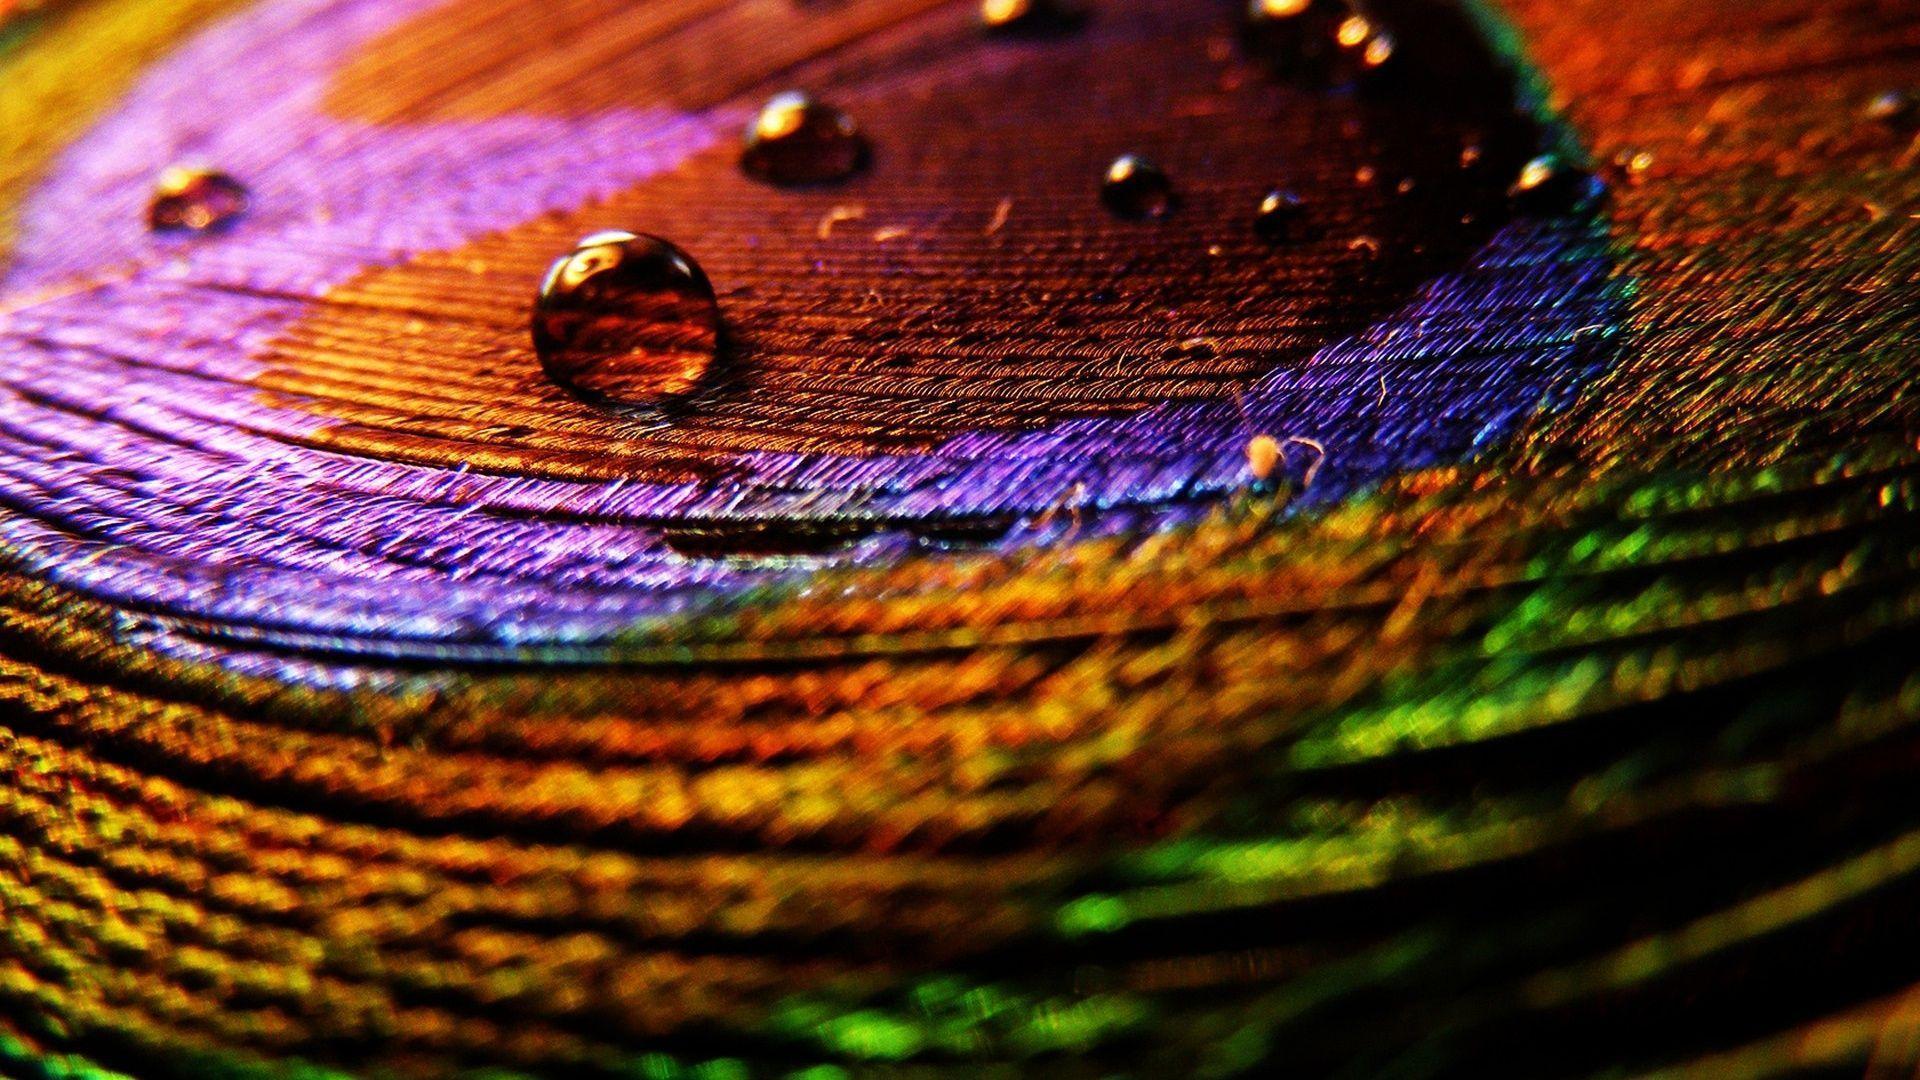 Wallpapers Of Peacock Feathers HD 2015 1920x1080